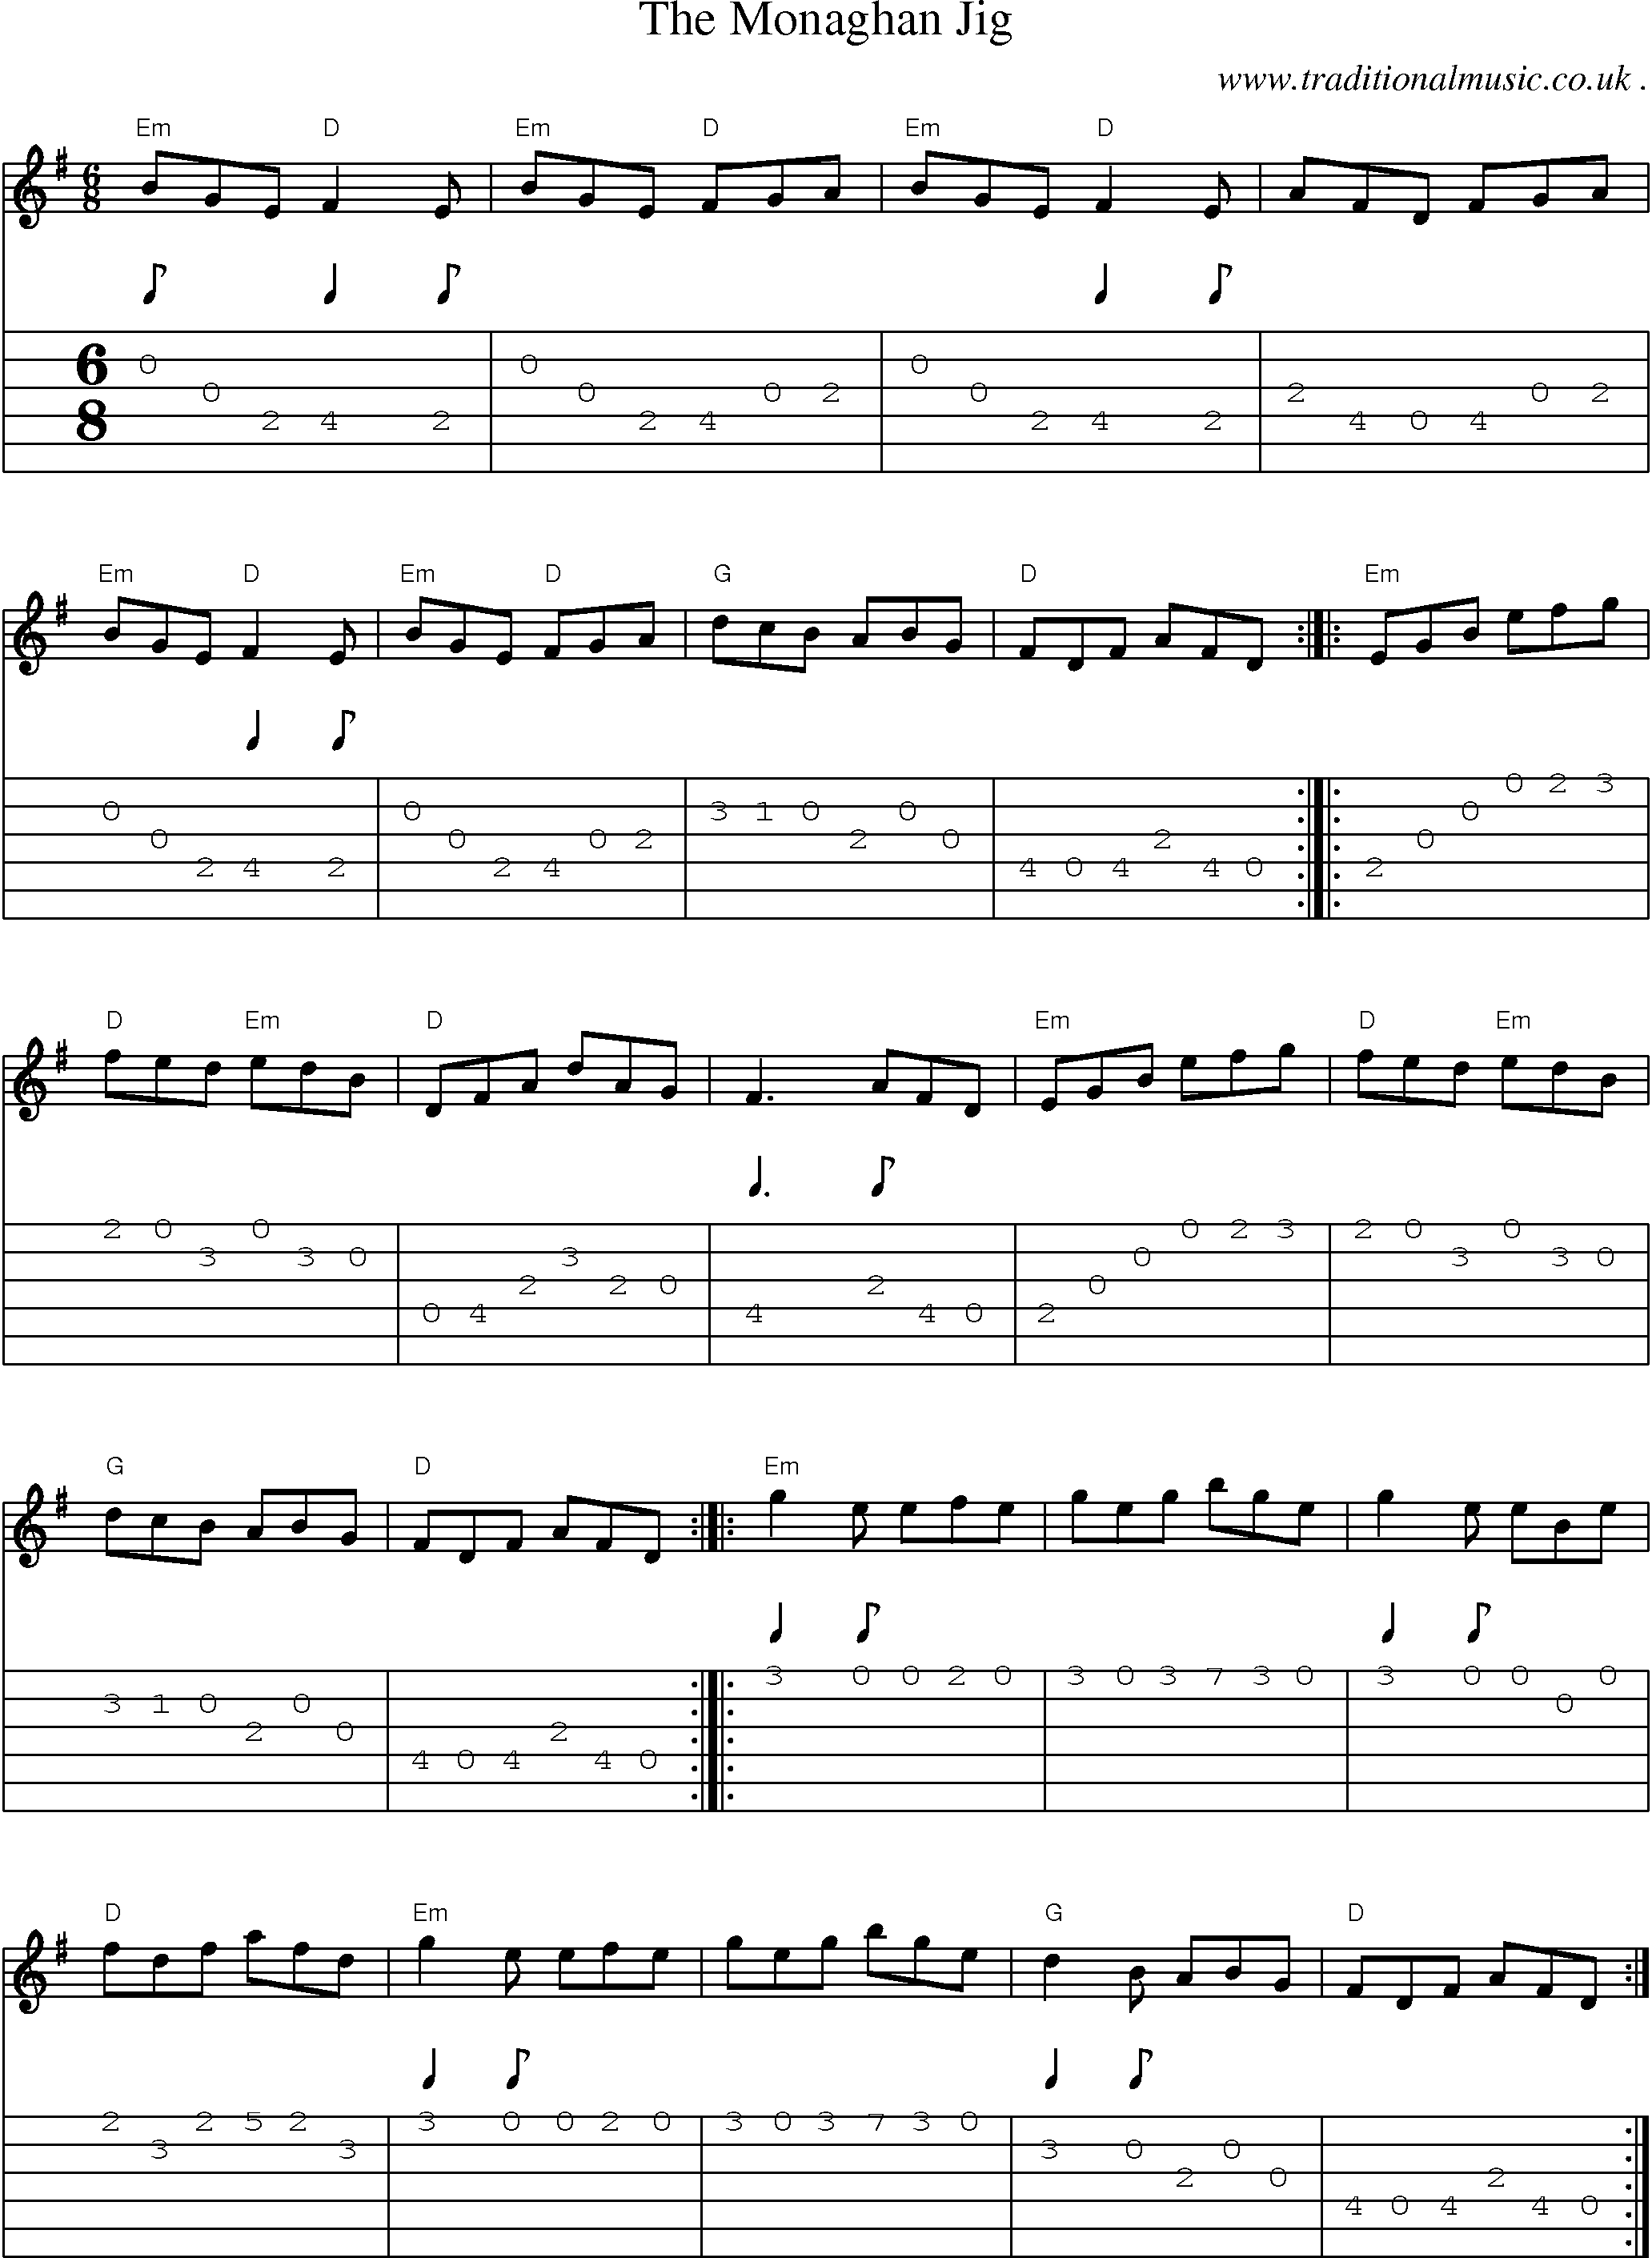 Music Score and Guitar Tabs for The Monaghan Jig